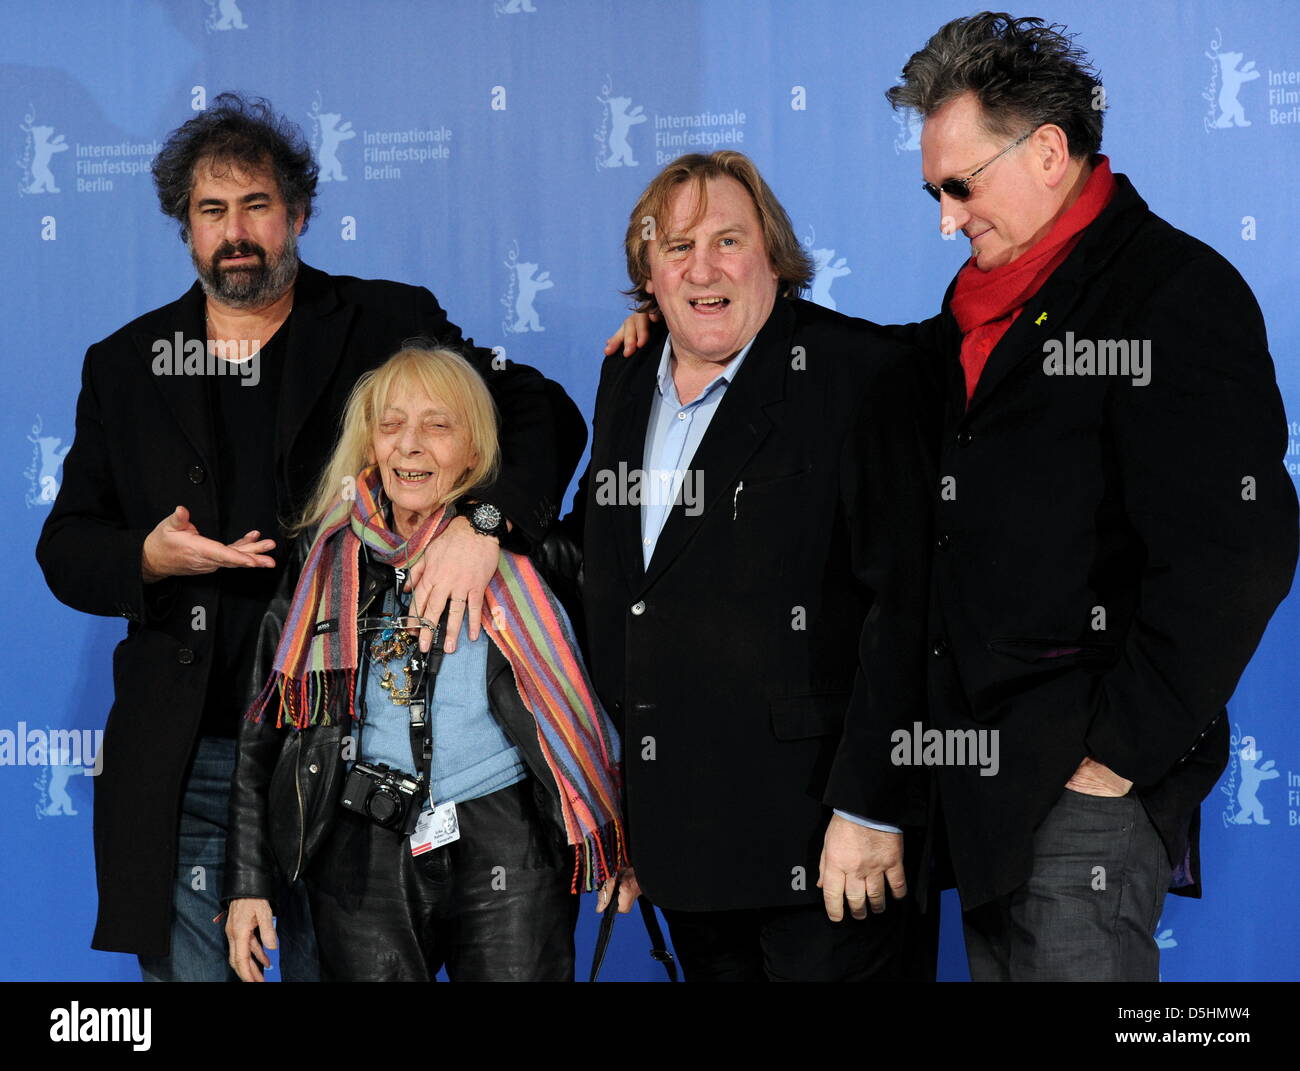 French directors Benoit Delepine (R), Gustave Kervern (L), French actor Gerard Depardieu (2nd R) and Berlinale photographer Erika Rabau pose during the photocall of the film 'Mammuth' running in competition during the 60th Berlinale International Film Festival in Berlin, Germany, Friday, 19 February 2010. The festival runs until 21 February 2010. Photo: Tim Brakemeier dpa/lbn  +++( Stock Photo